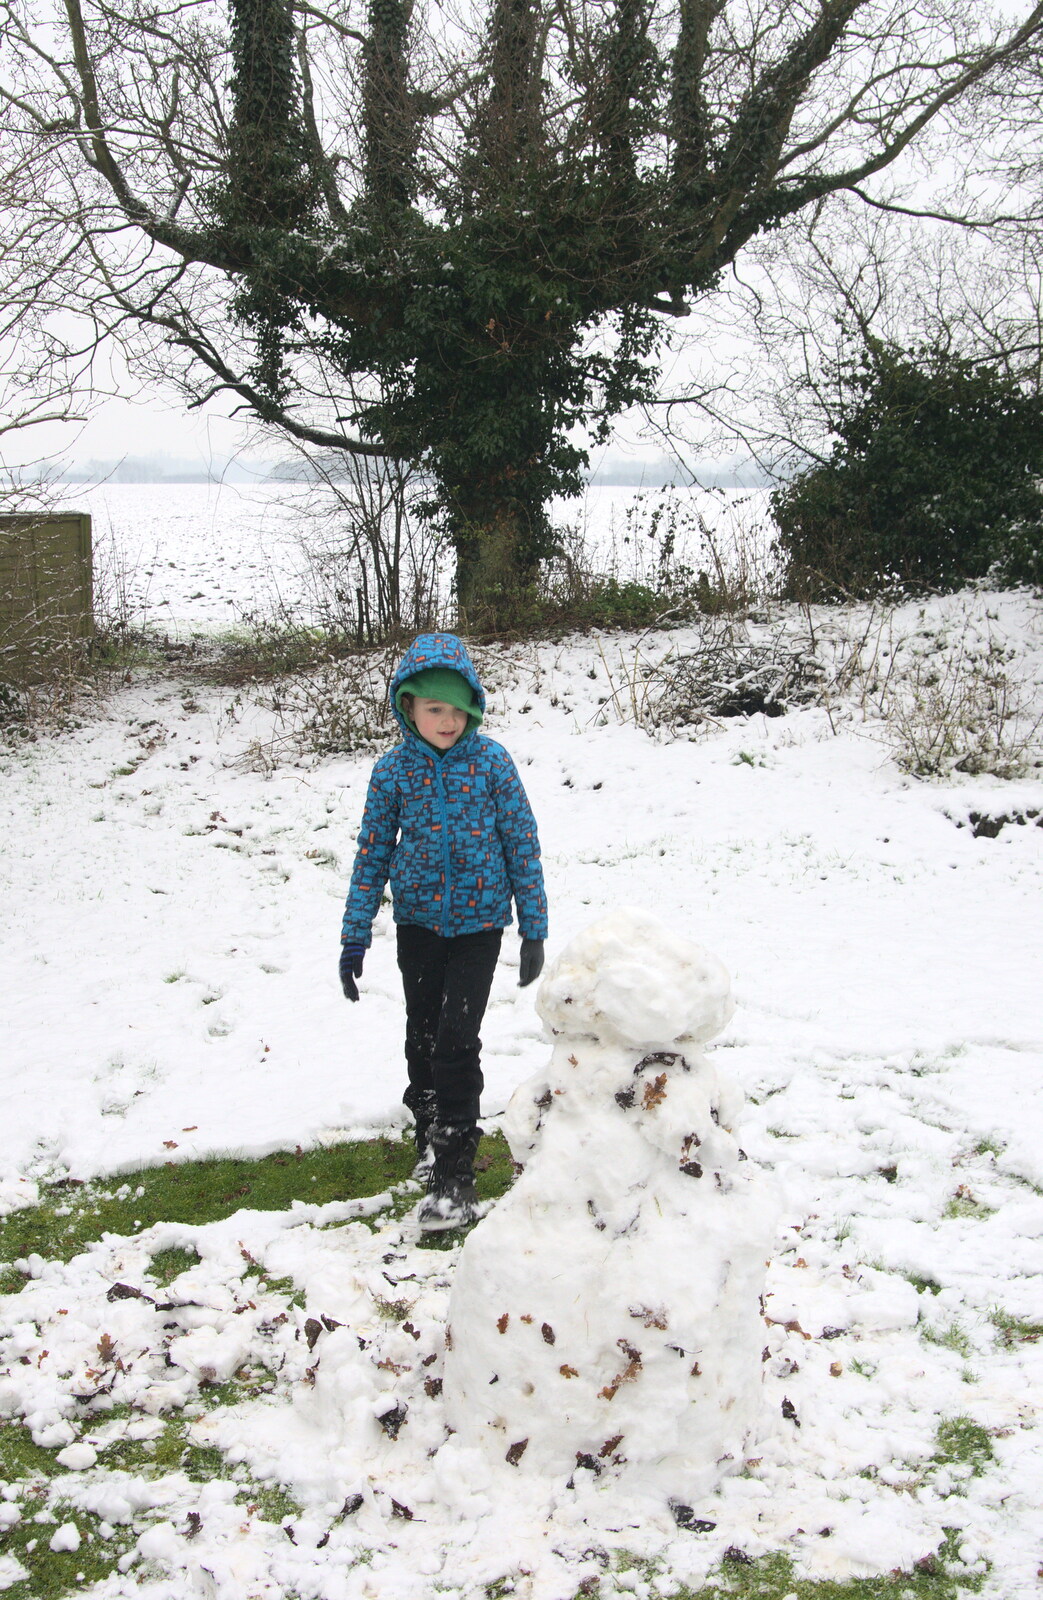 Fred considers the snowman from A Snowy Day, Brome, Suffolk - 12th February 2017